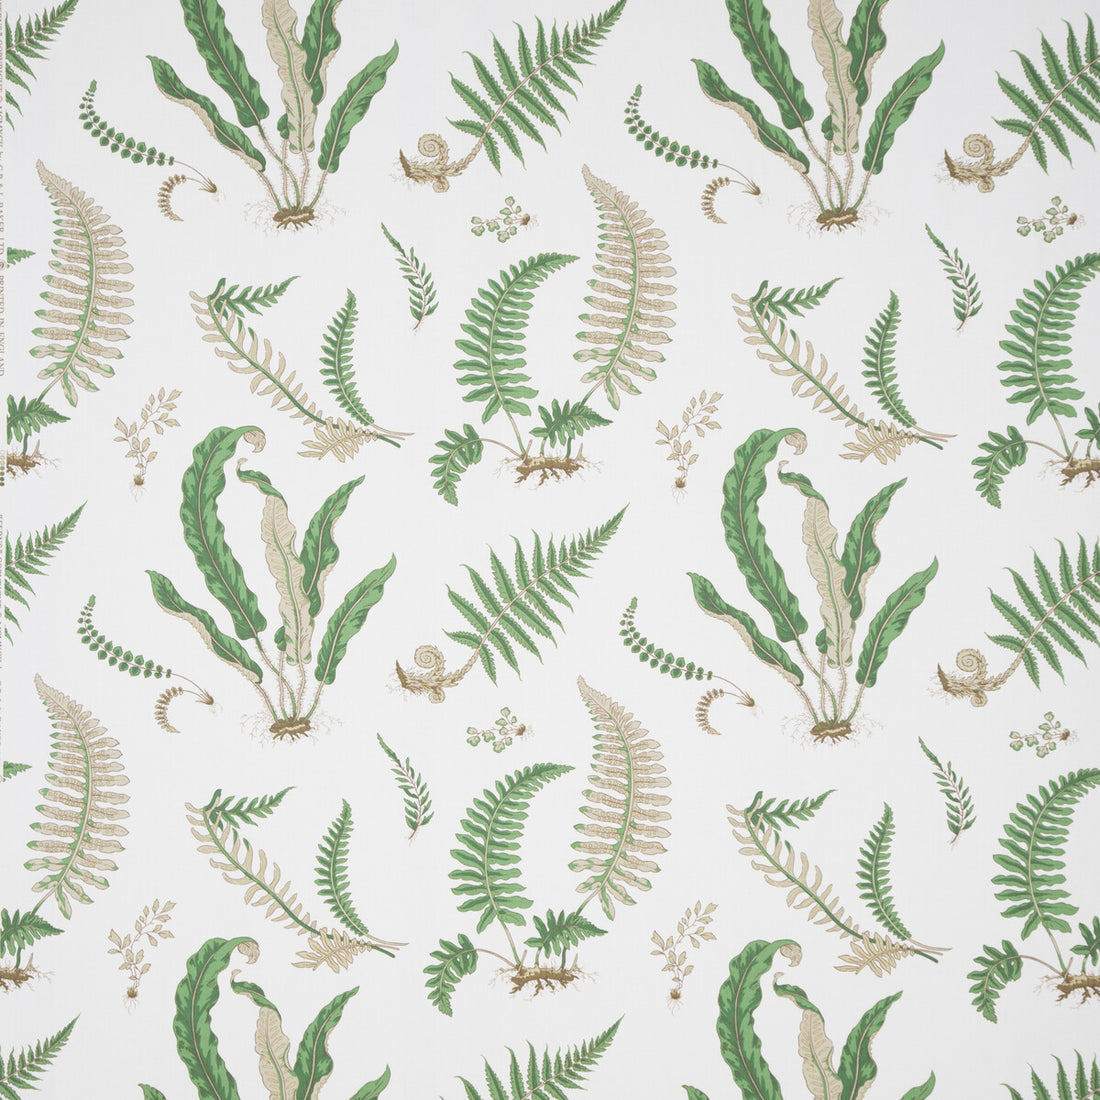 31032 fabric in 1 color - pattern 031032.01.0 - by Lee Jofa in the Perennia collection